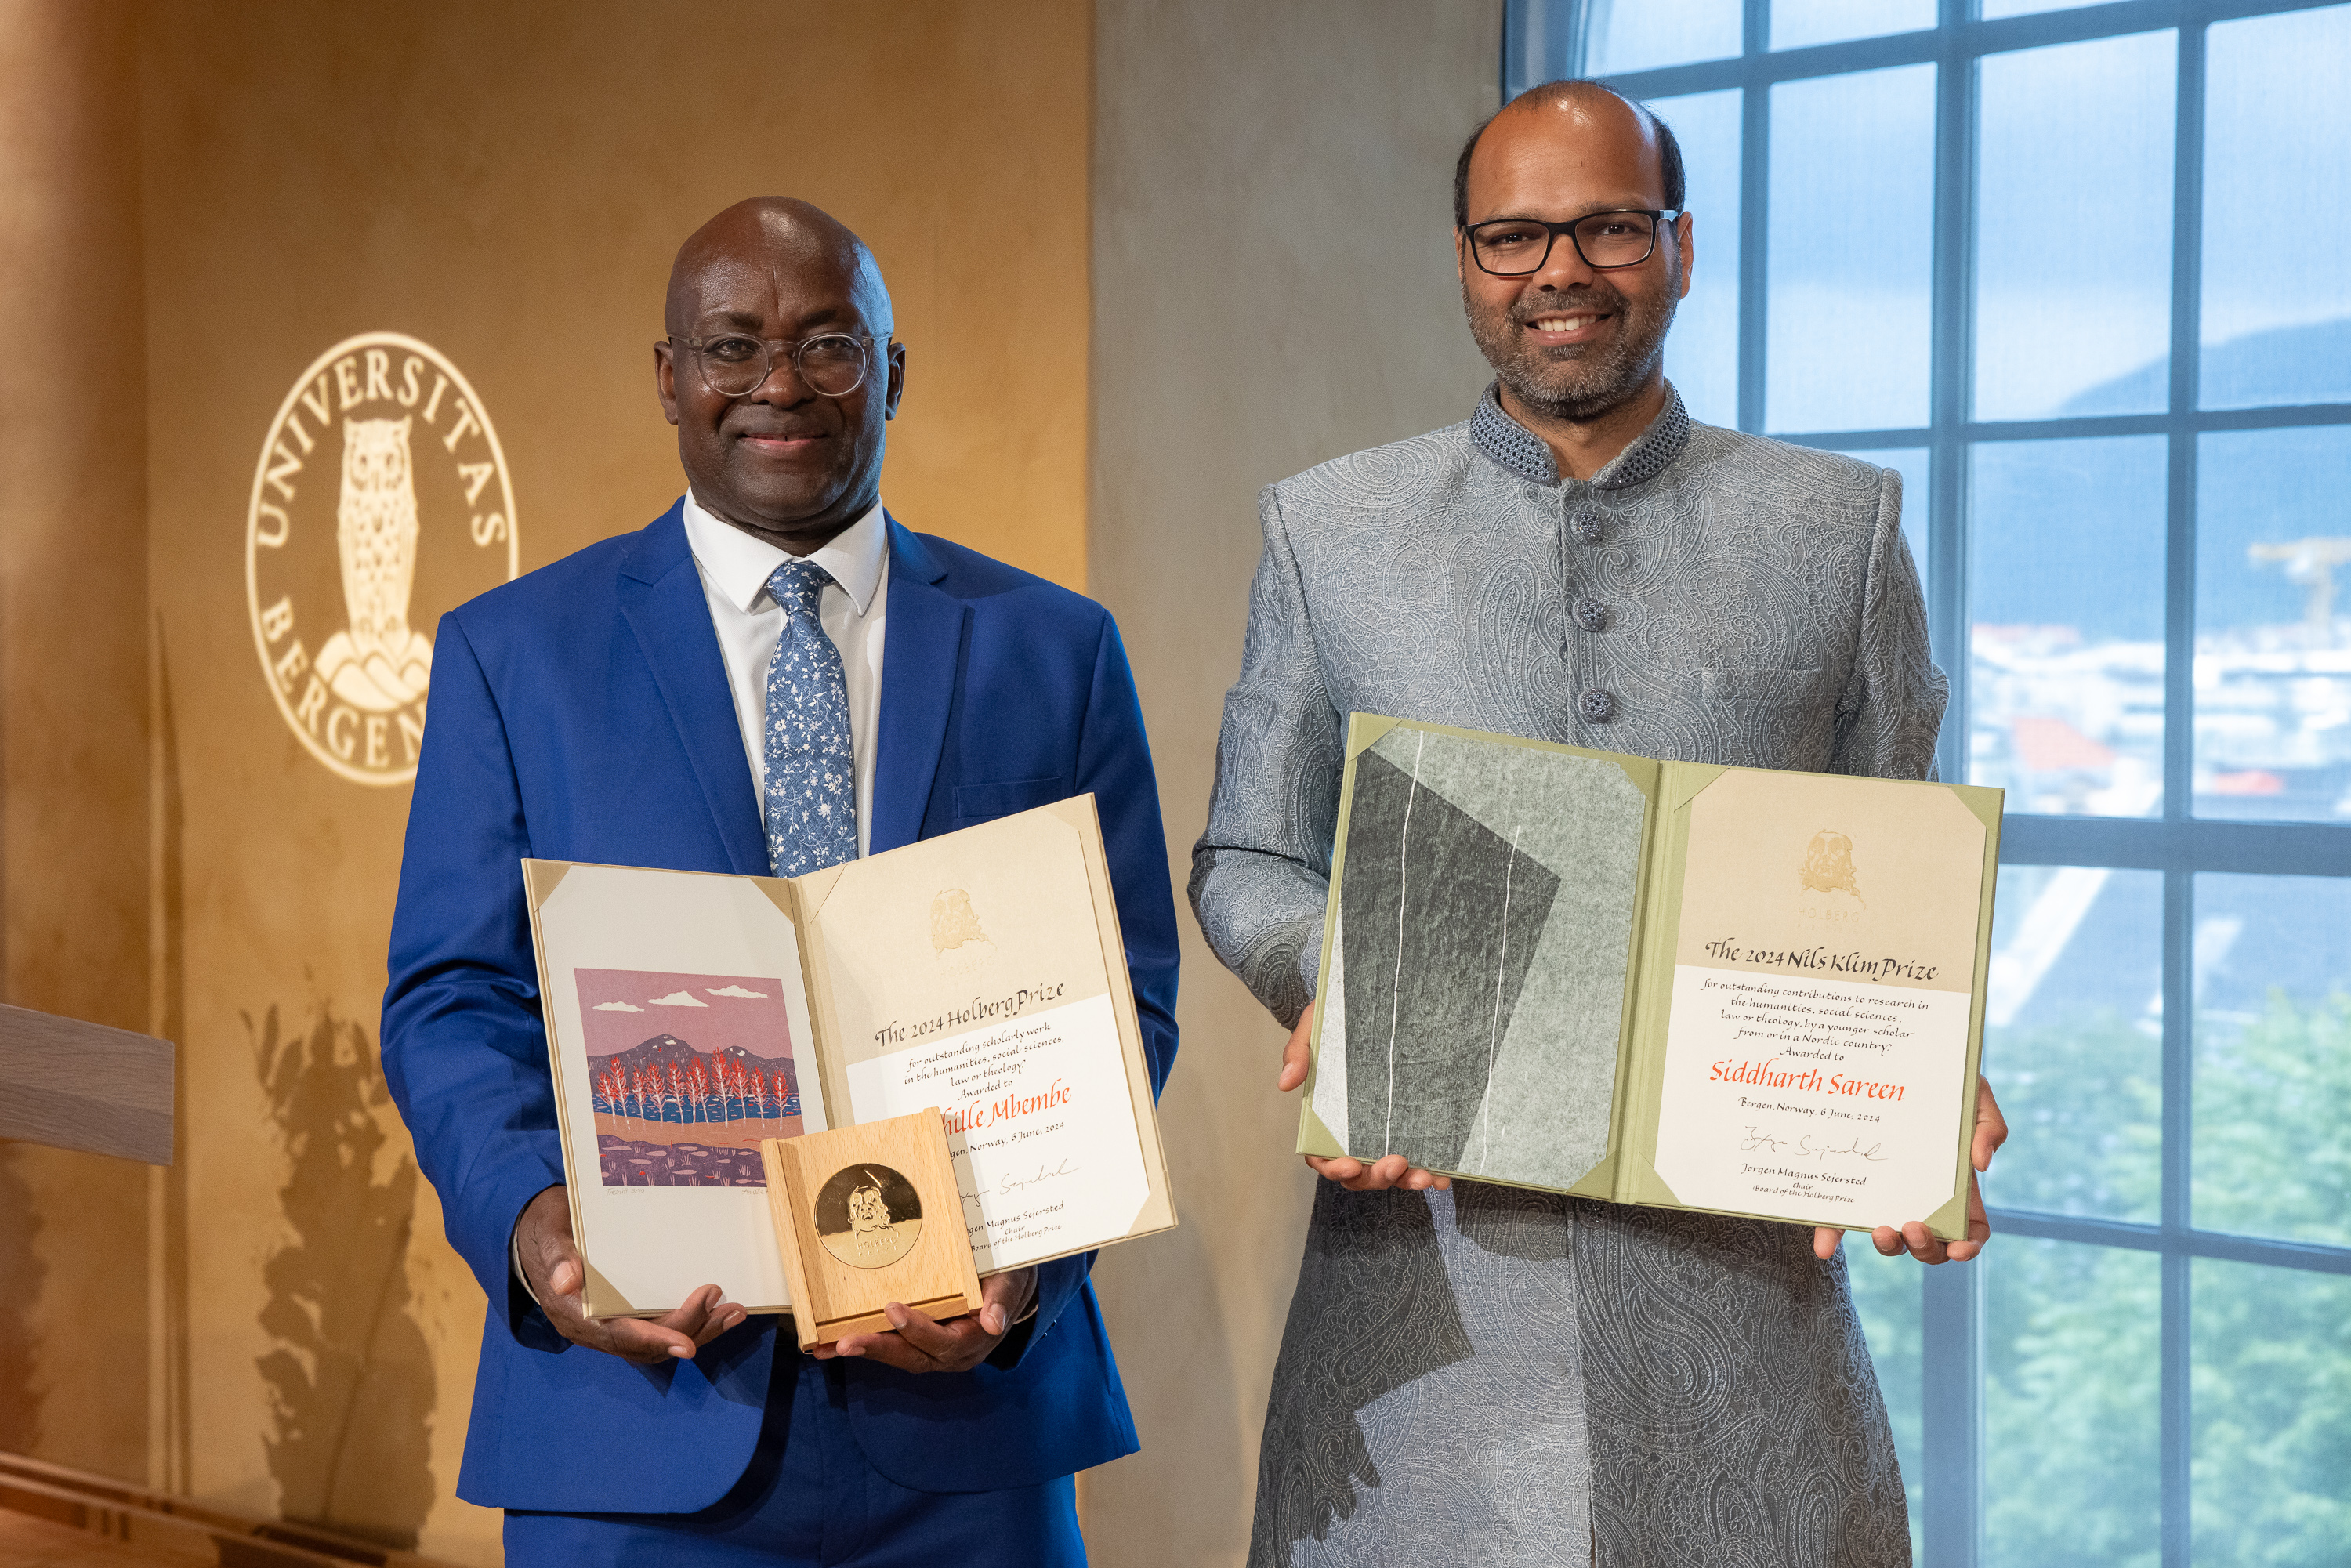 Today, the Holberg Prize and the Nils Klim Prize were conferred, upon Achille Mbembe and Siddharth Sareen, respectively.